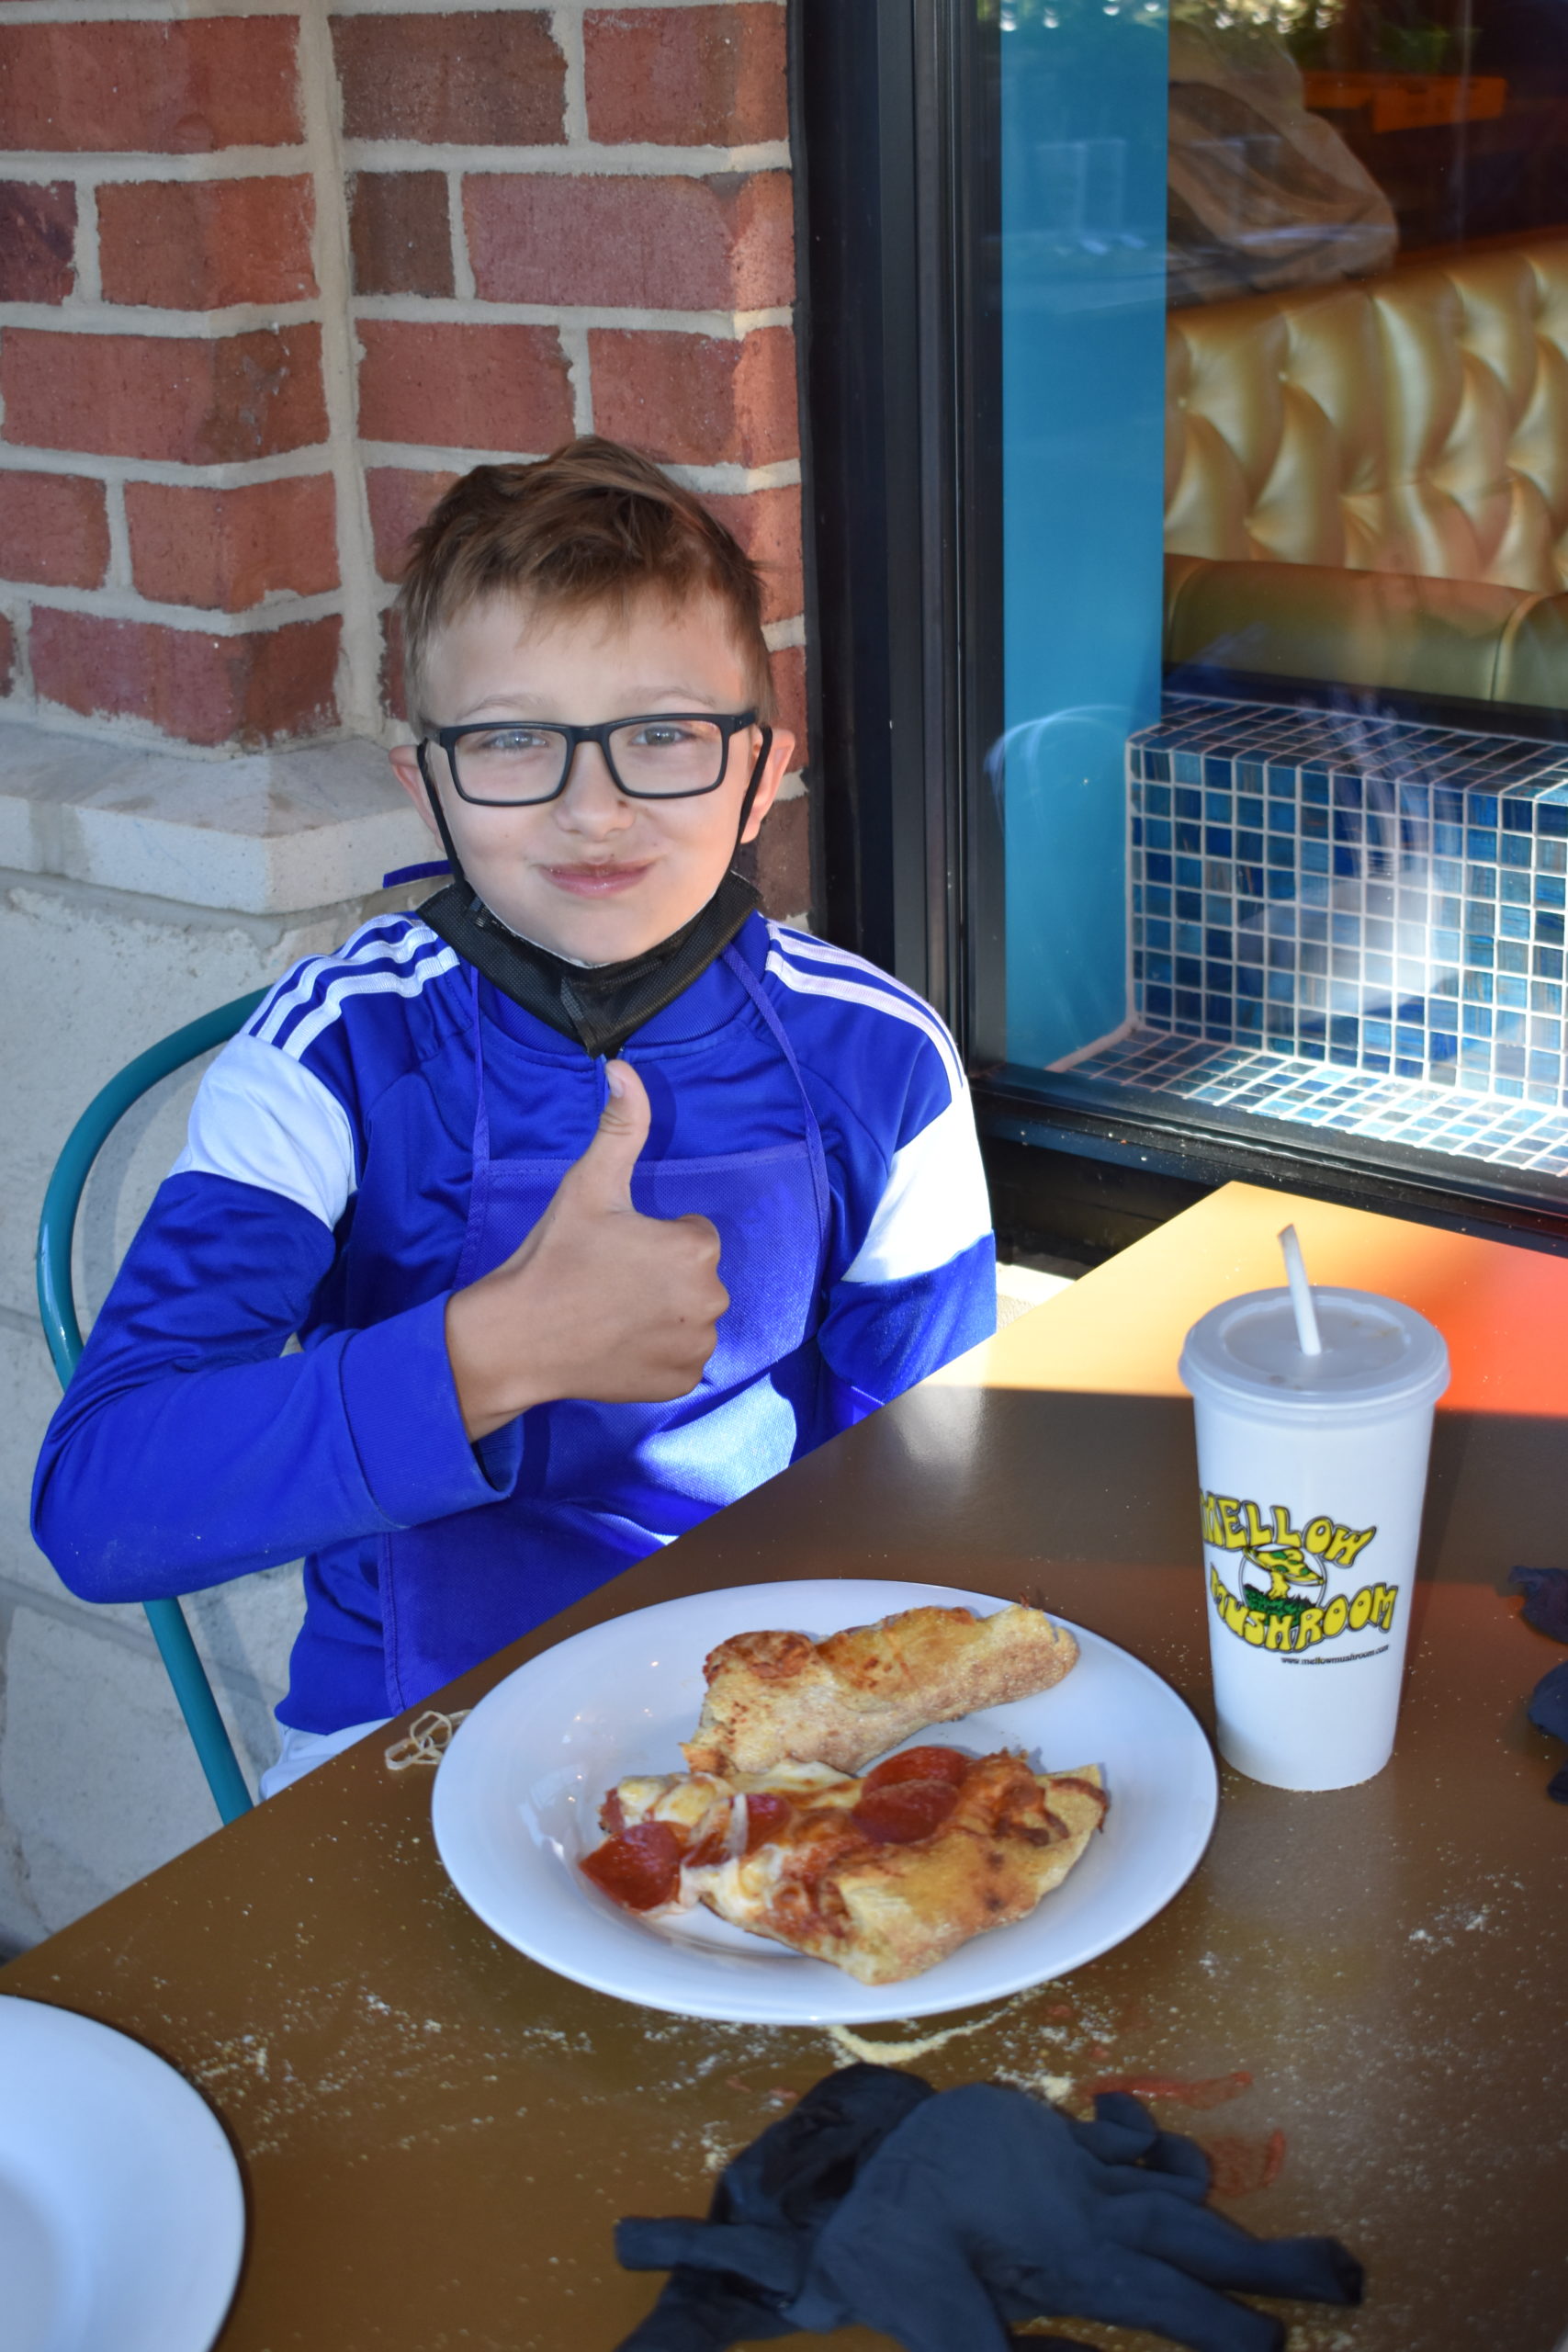 Image a boy eating pizza and giving a thumbs up with a smile